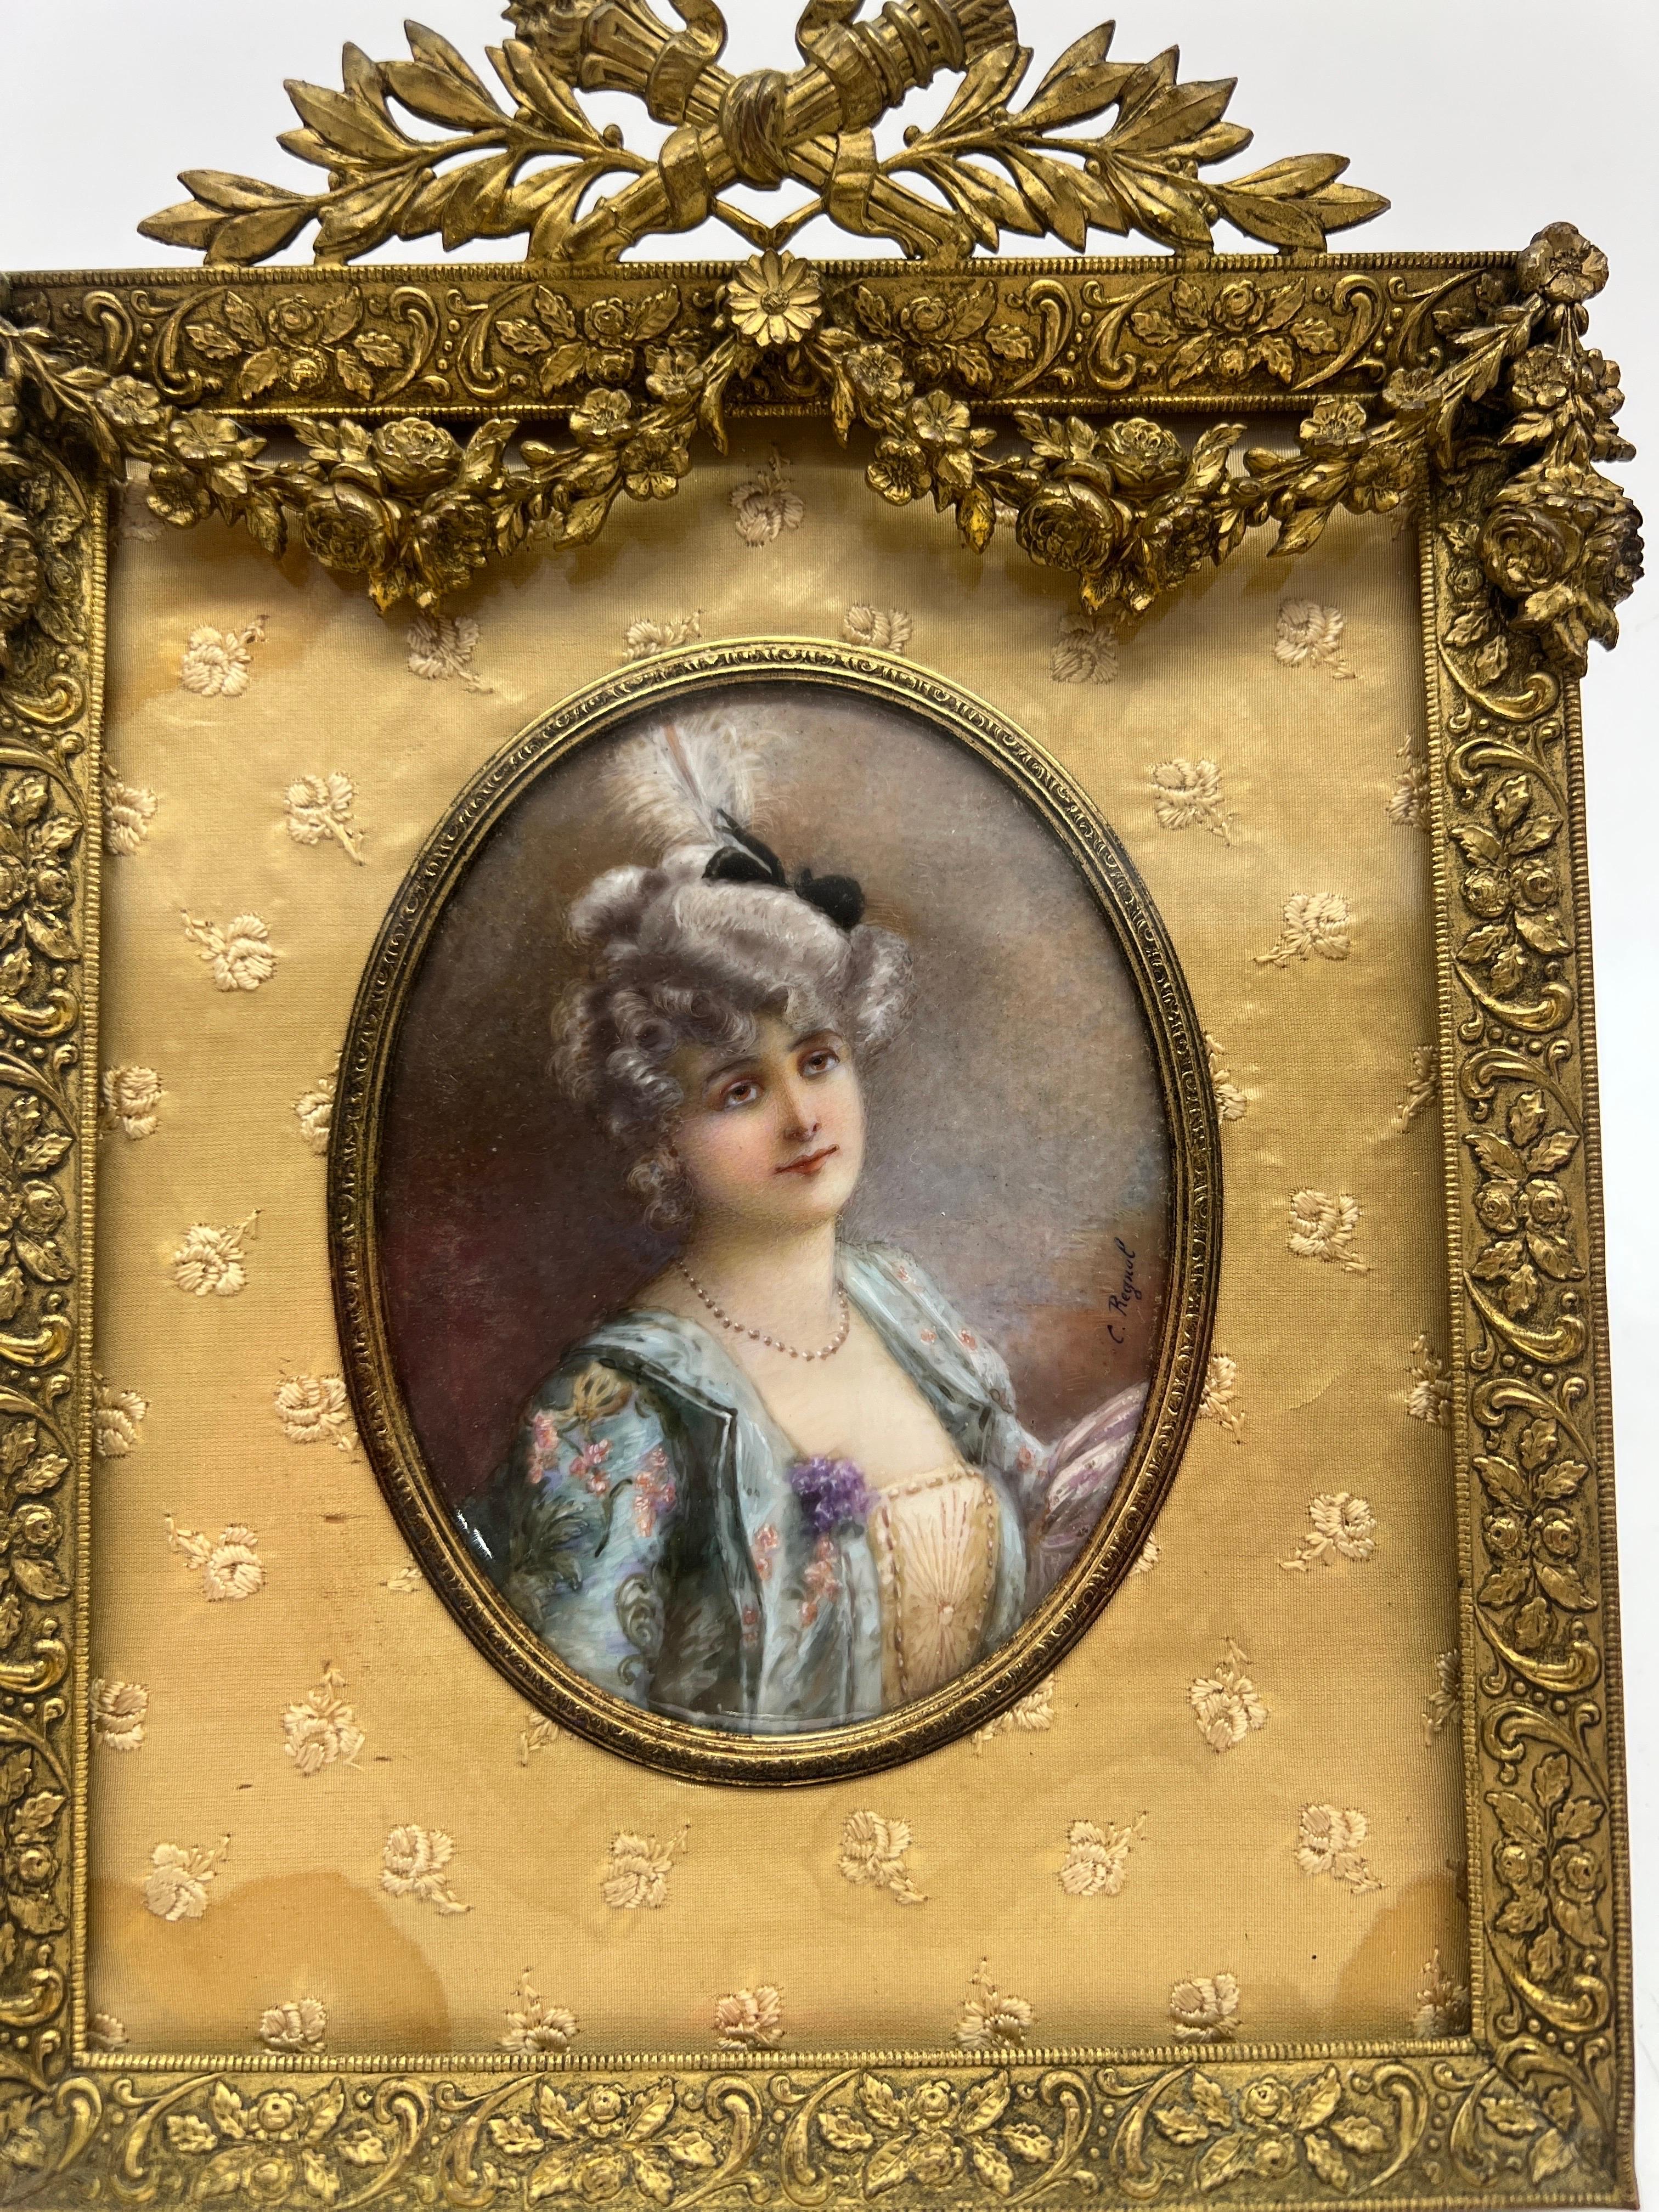 French, 19th century.

A fine quality 19th century French miniature painting of beautiful lady. The oval painting is housed under a domed glass shield, surrounded by delicate silk embroidered with flowers and housed completely in a D'ore bronze